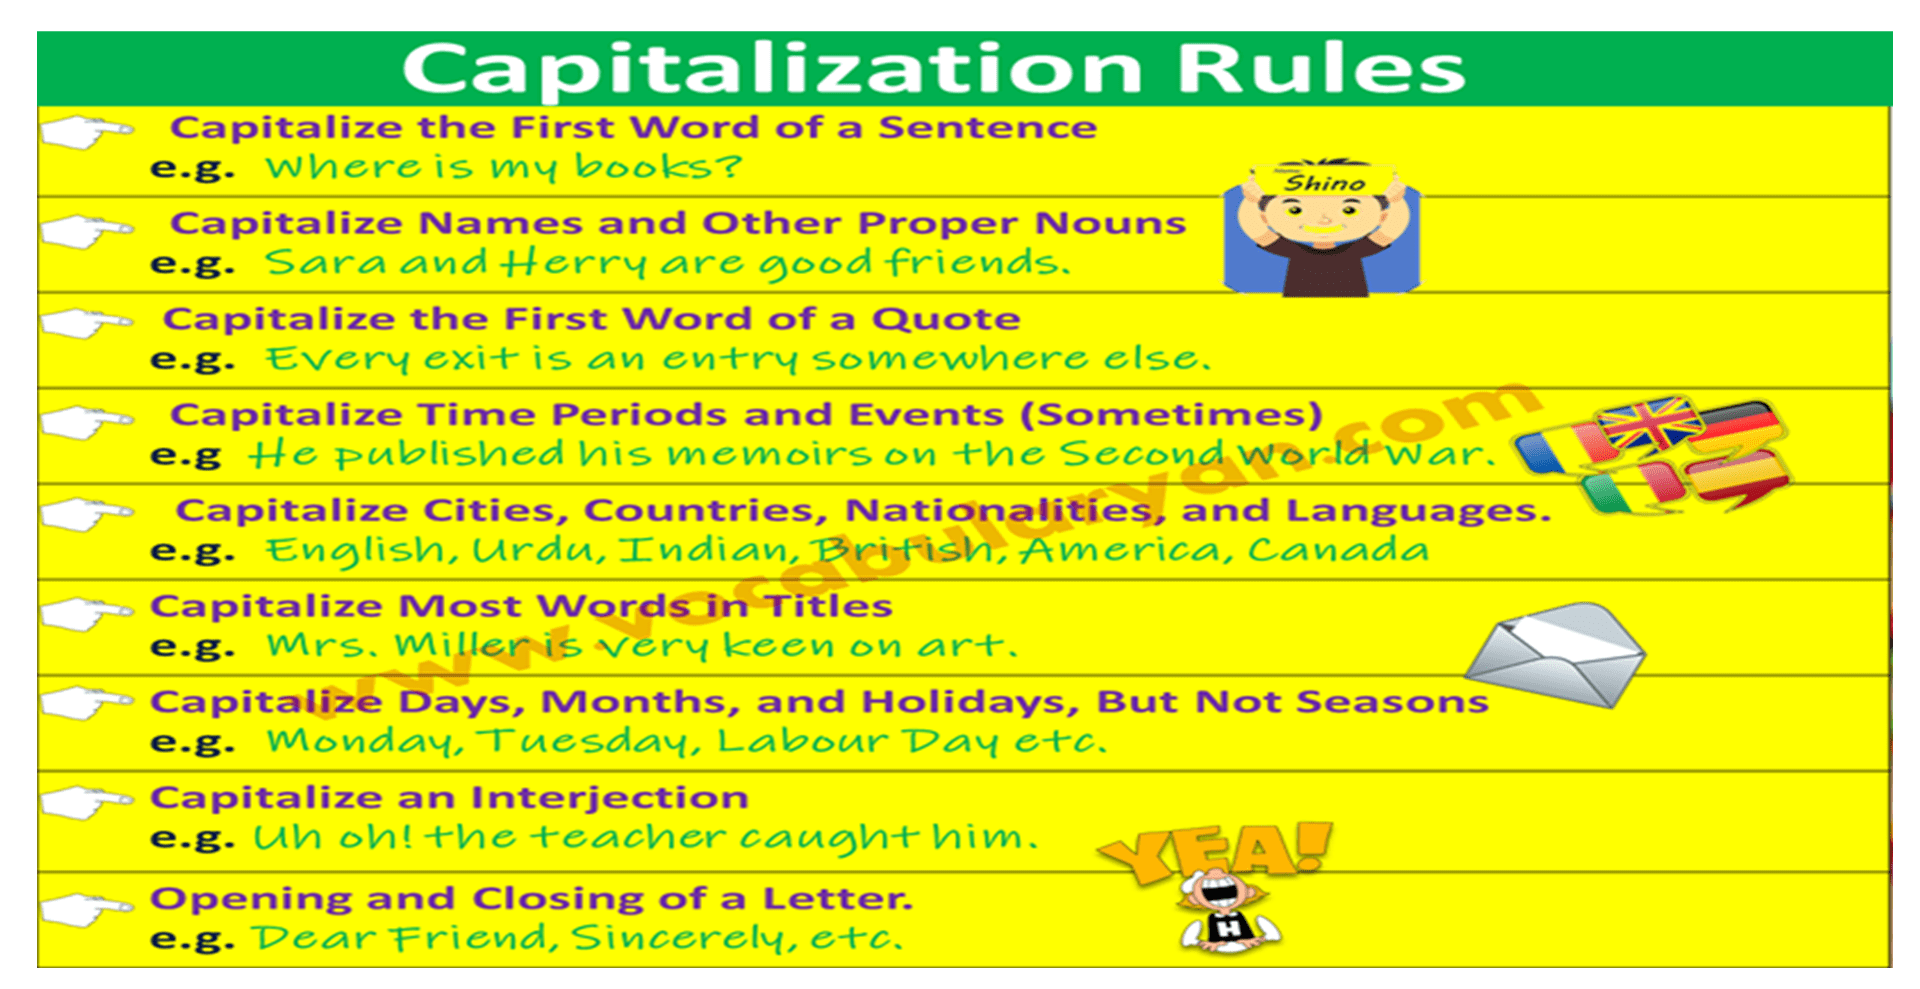 capitalization recovery -crypto -cryptocurrency -bitcoin -ethereum